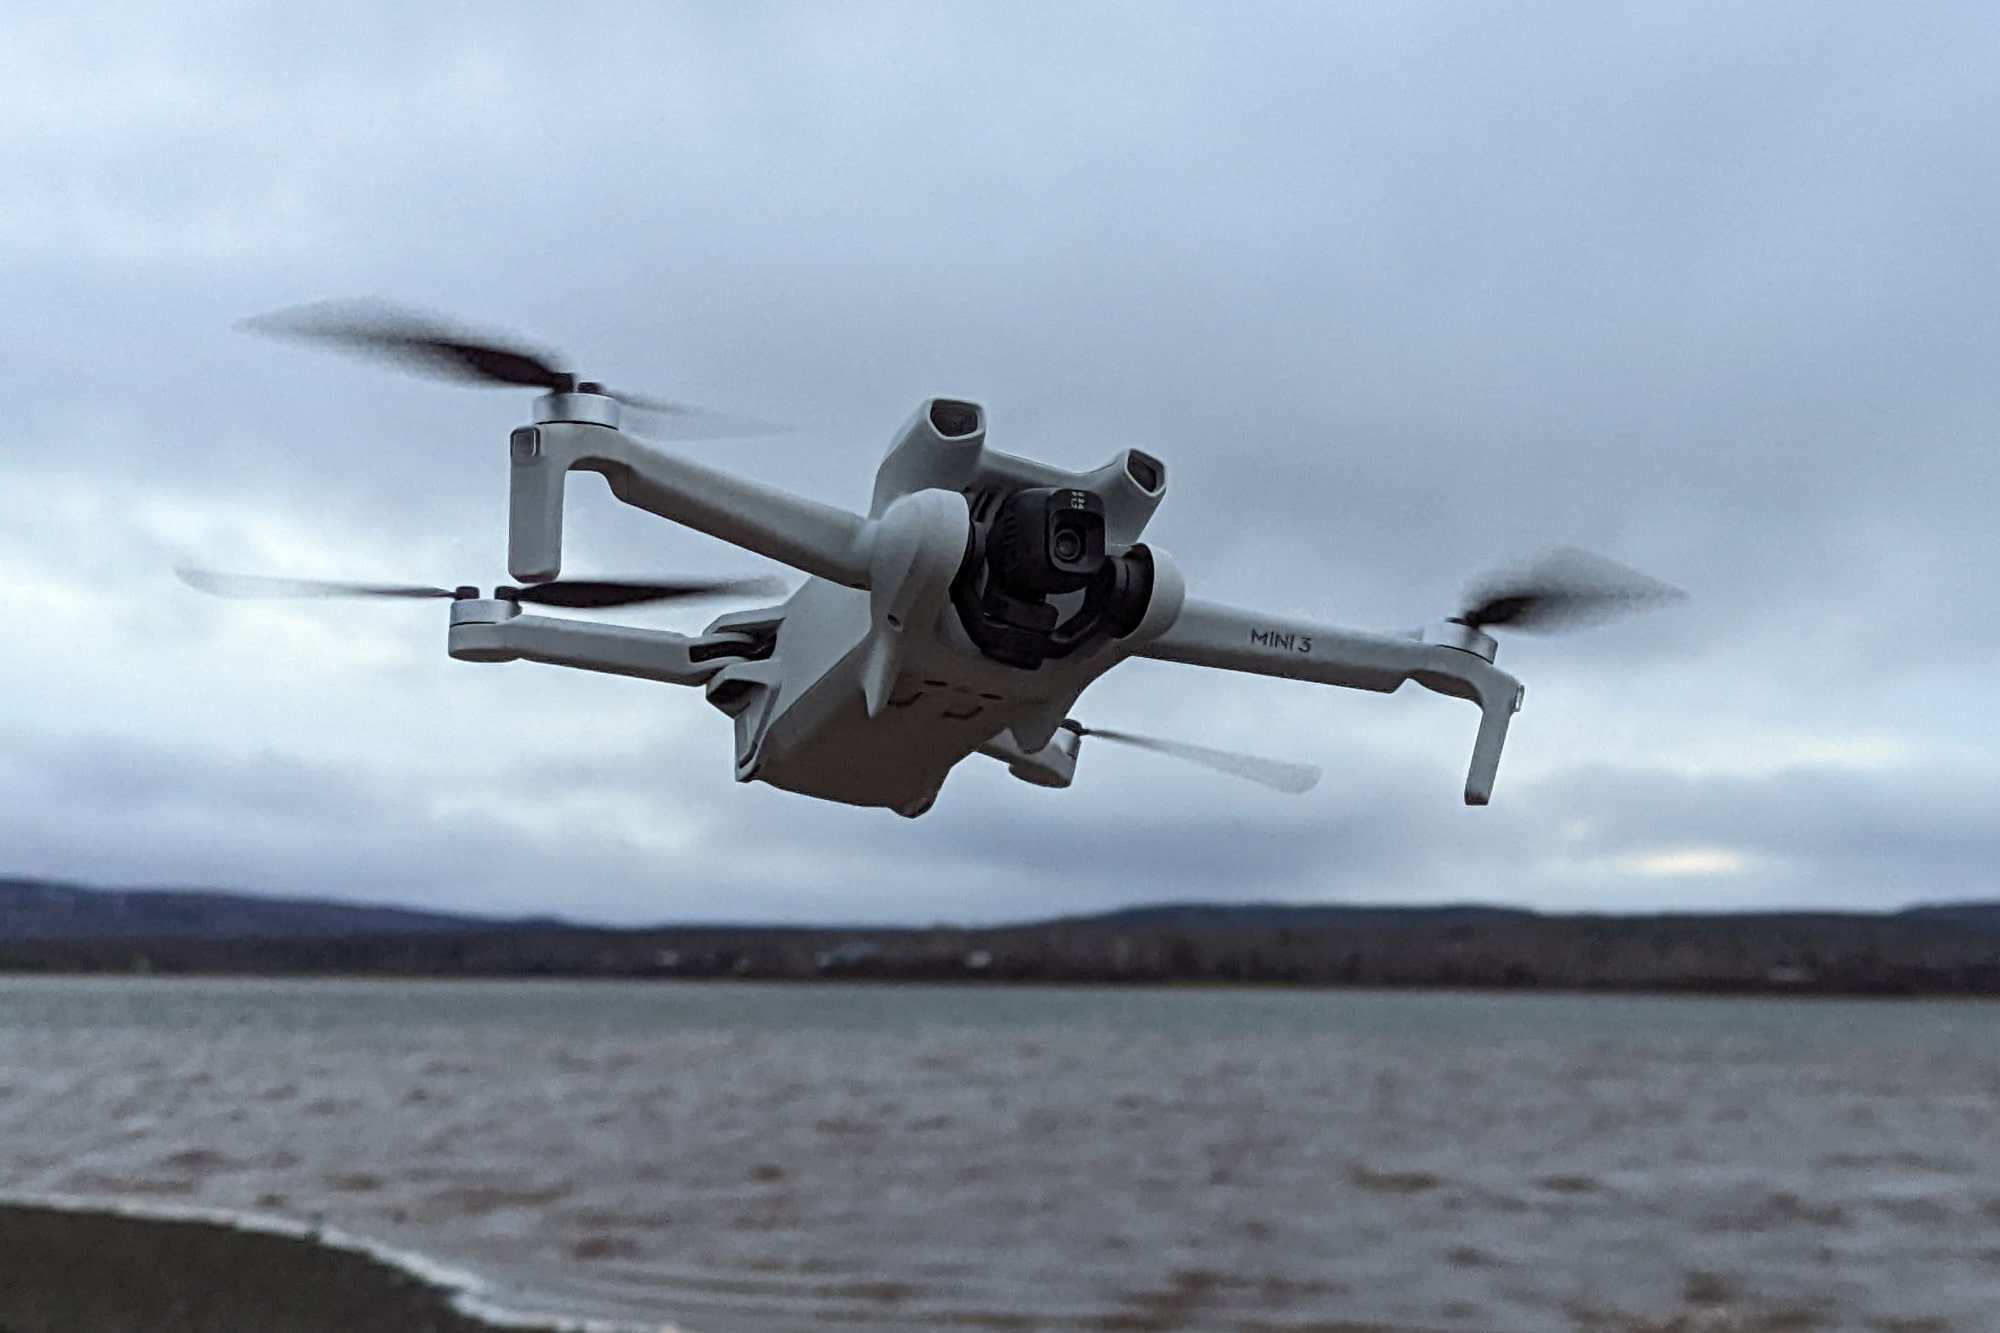 DJI Mini 3 Review: A spendy, sophisticated entry level drone